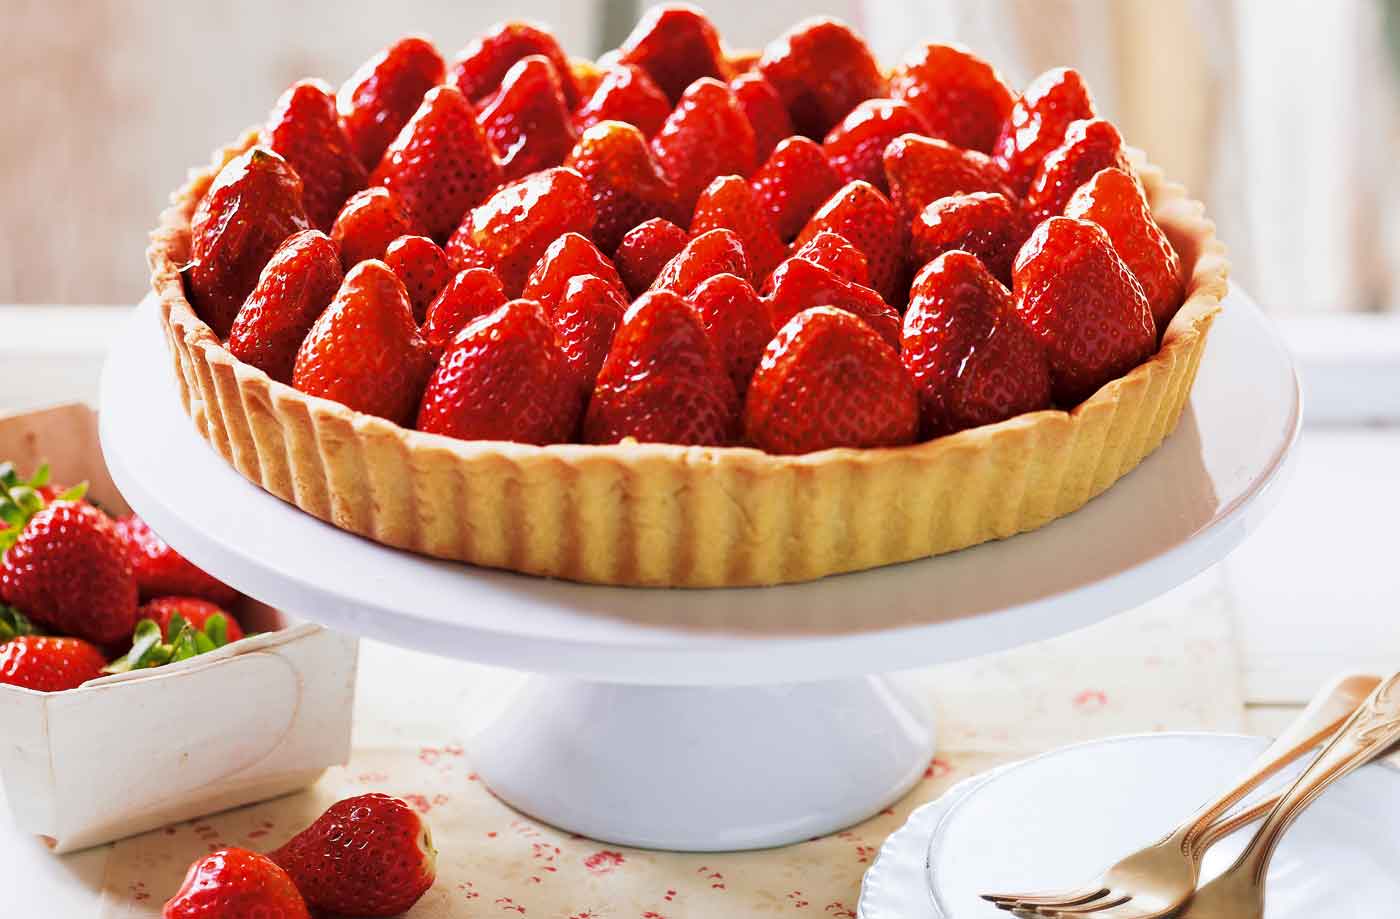 🍰 Only a Baked Good Connoisseur Will Have Eaten at Least 20/39 of These Foods Strawberry tart